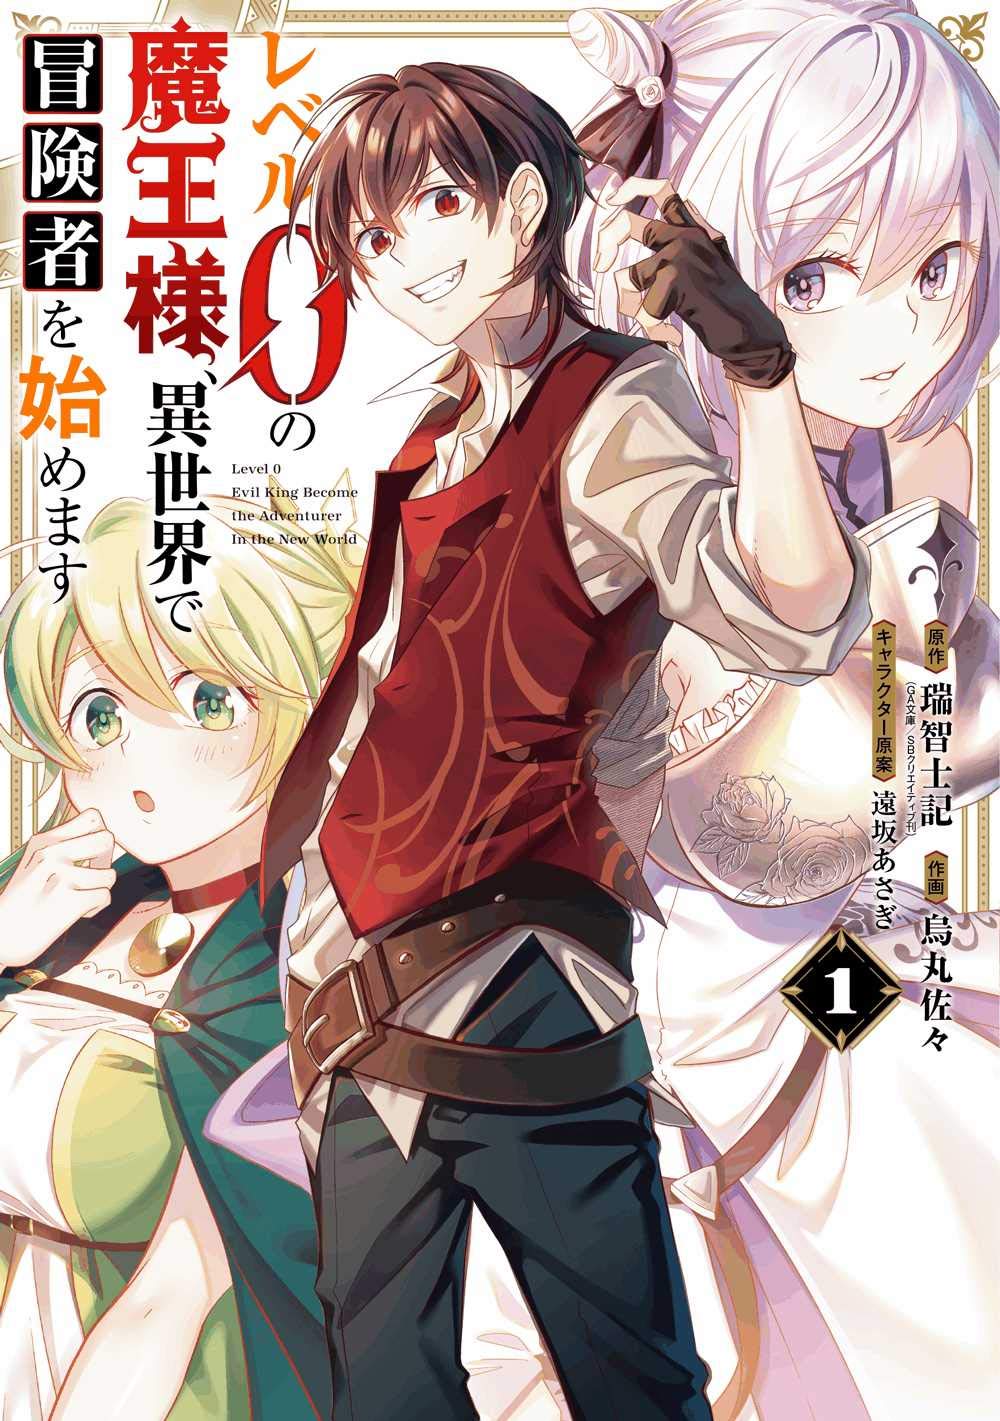 Read Manga Level 0 Demon King Becomes a Adventurer in Another World ...